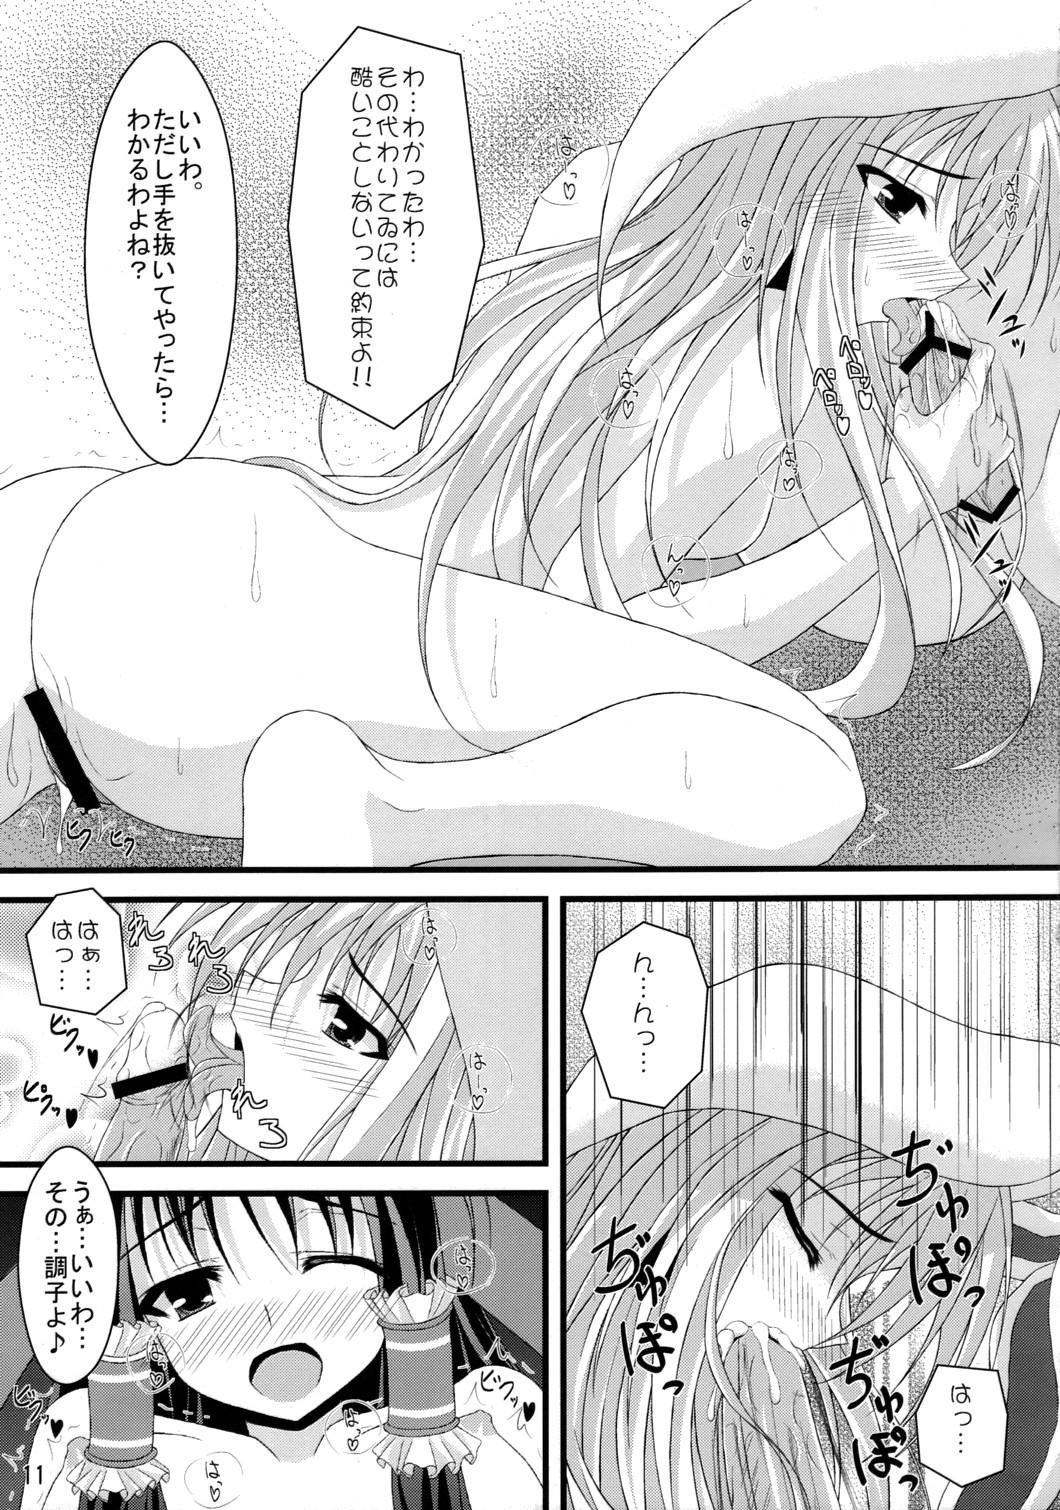 Freak Tele-Mesmerism - Touhou project Anal Play - Page 10